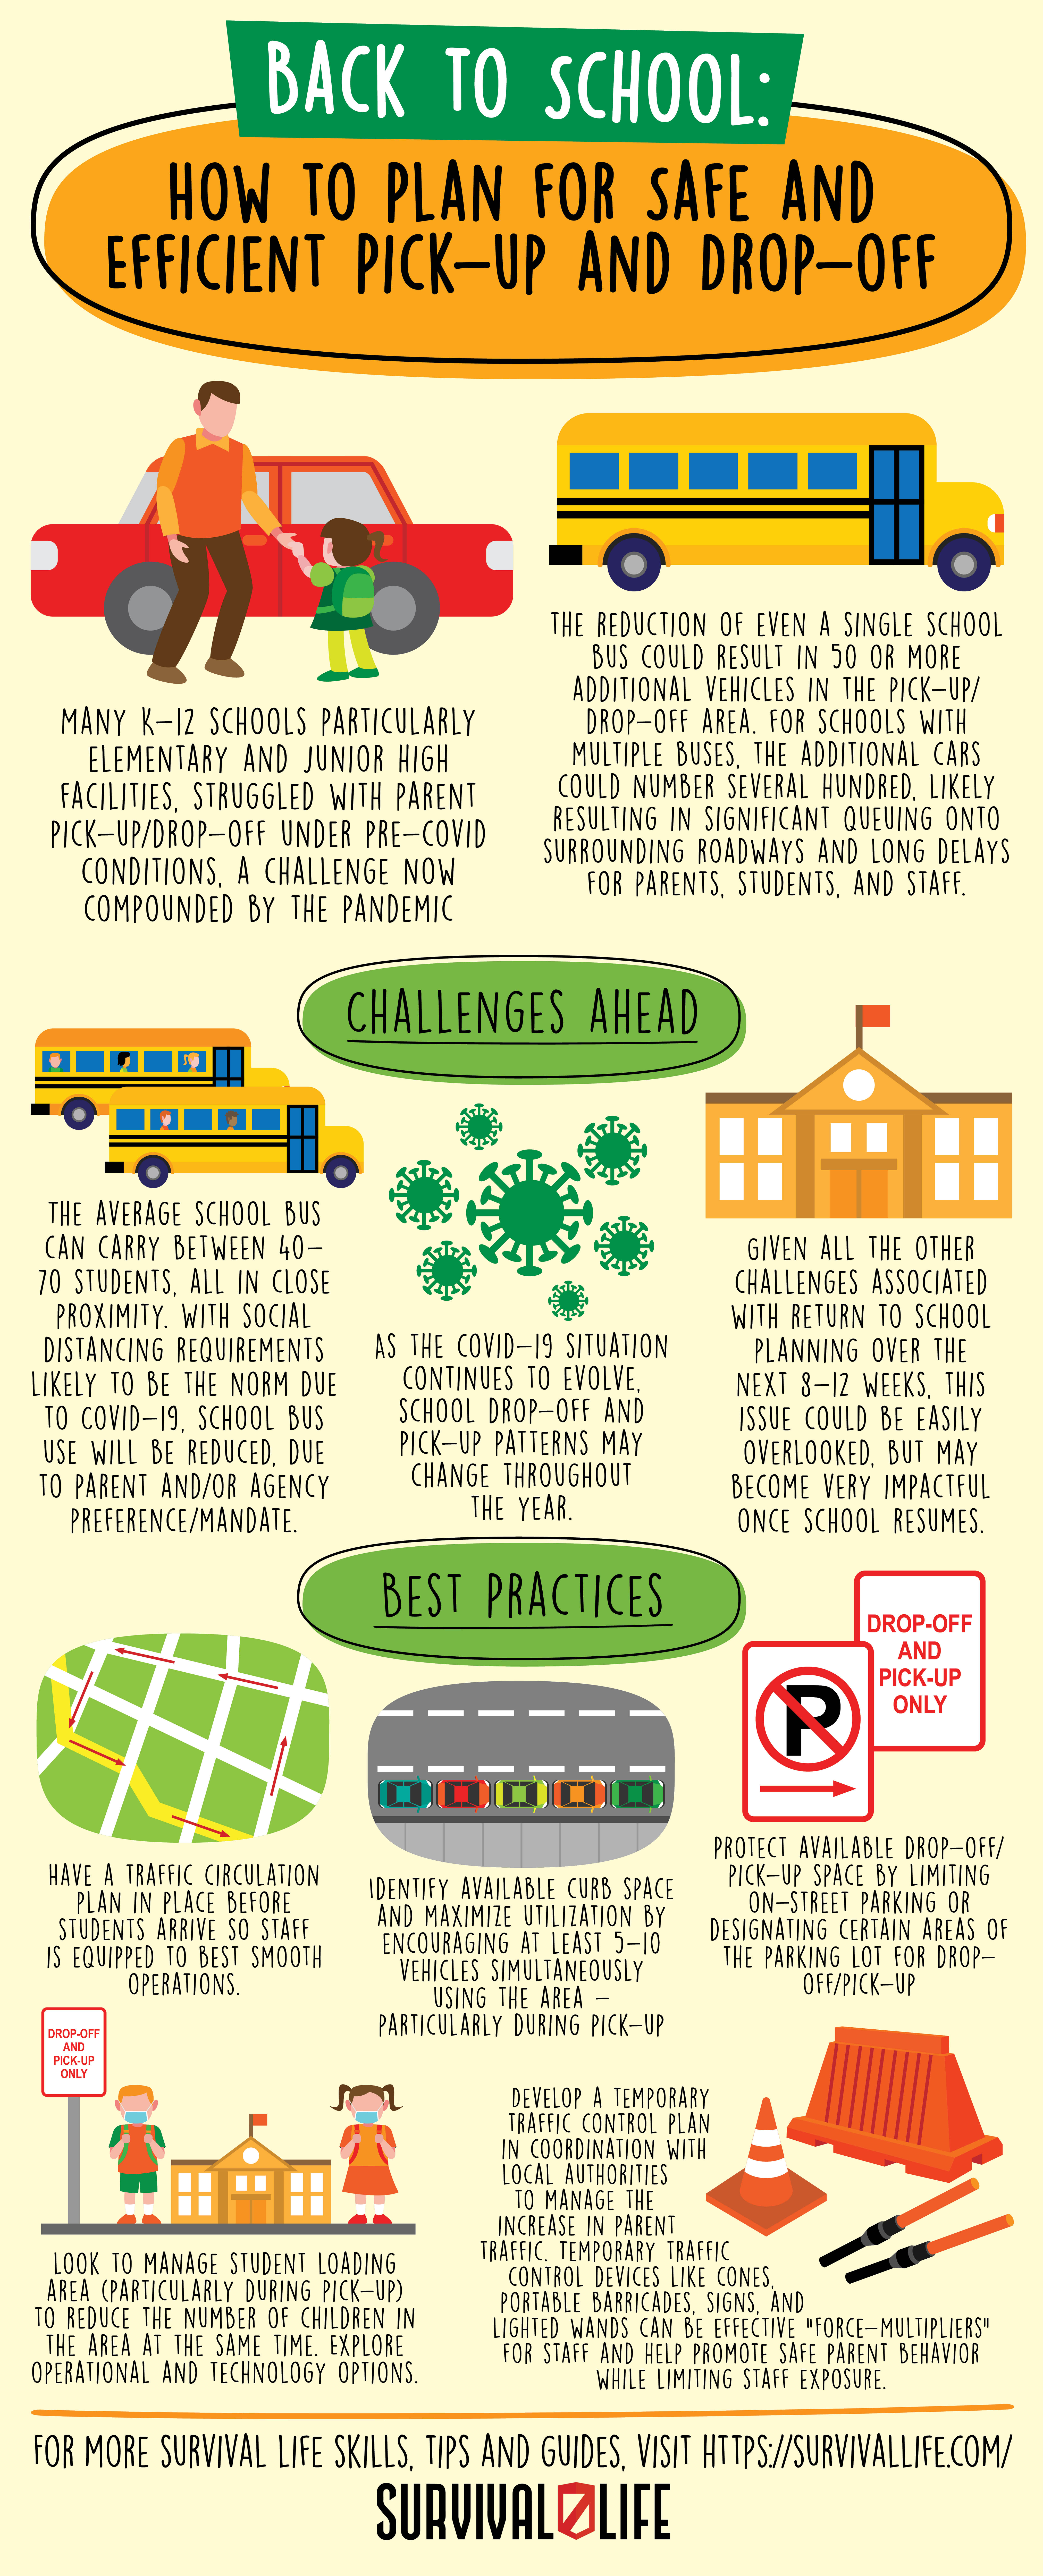 Back to School How to Plan for Safe and Efficient Pick-up and Drop-off